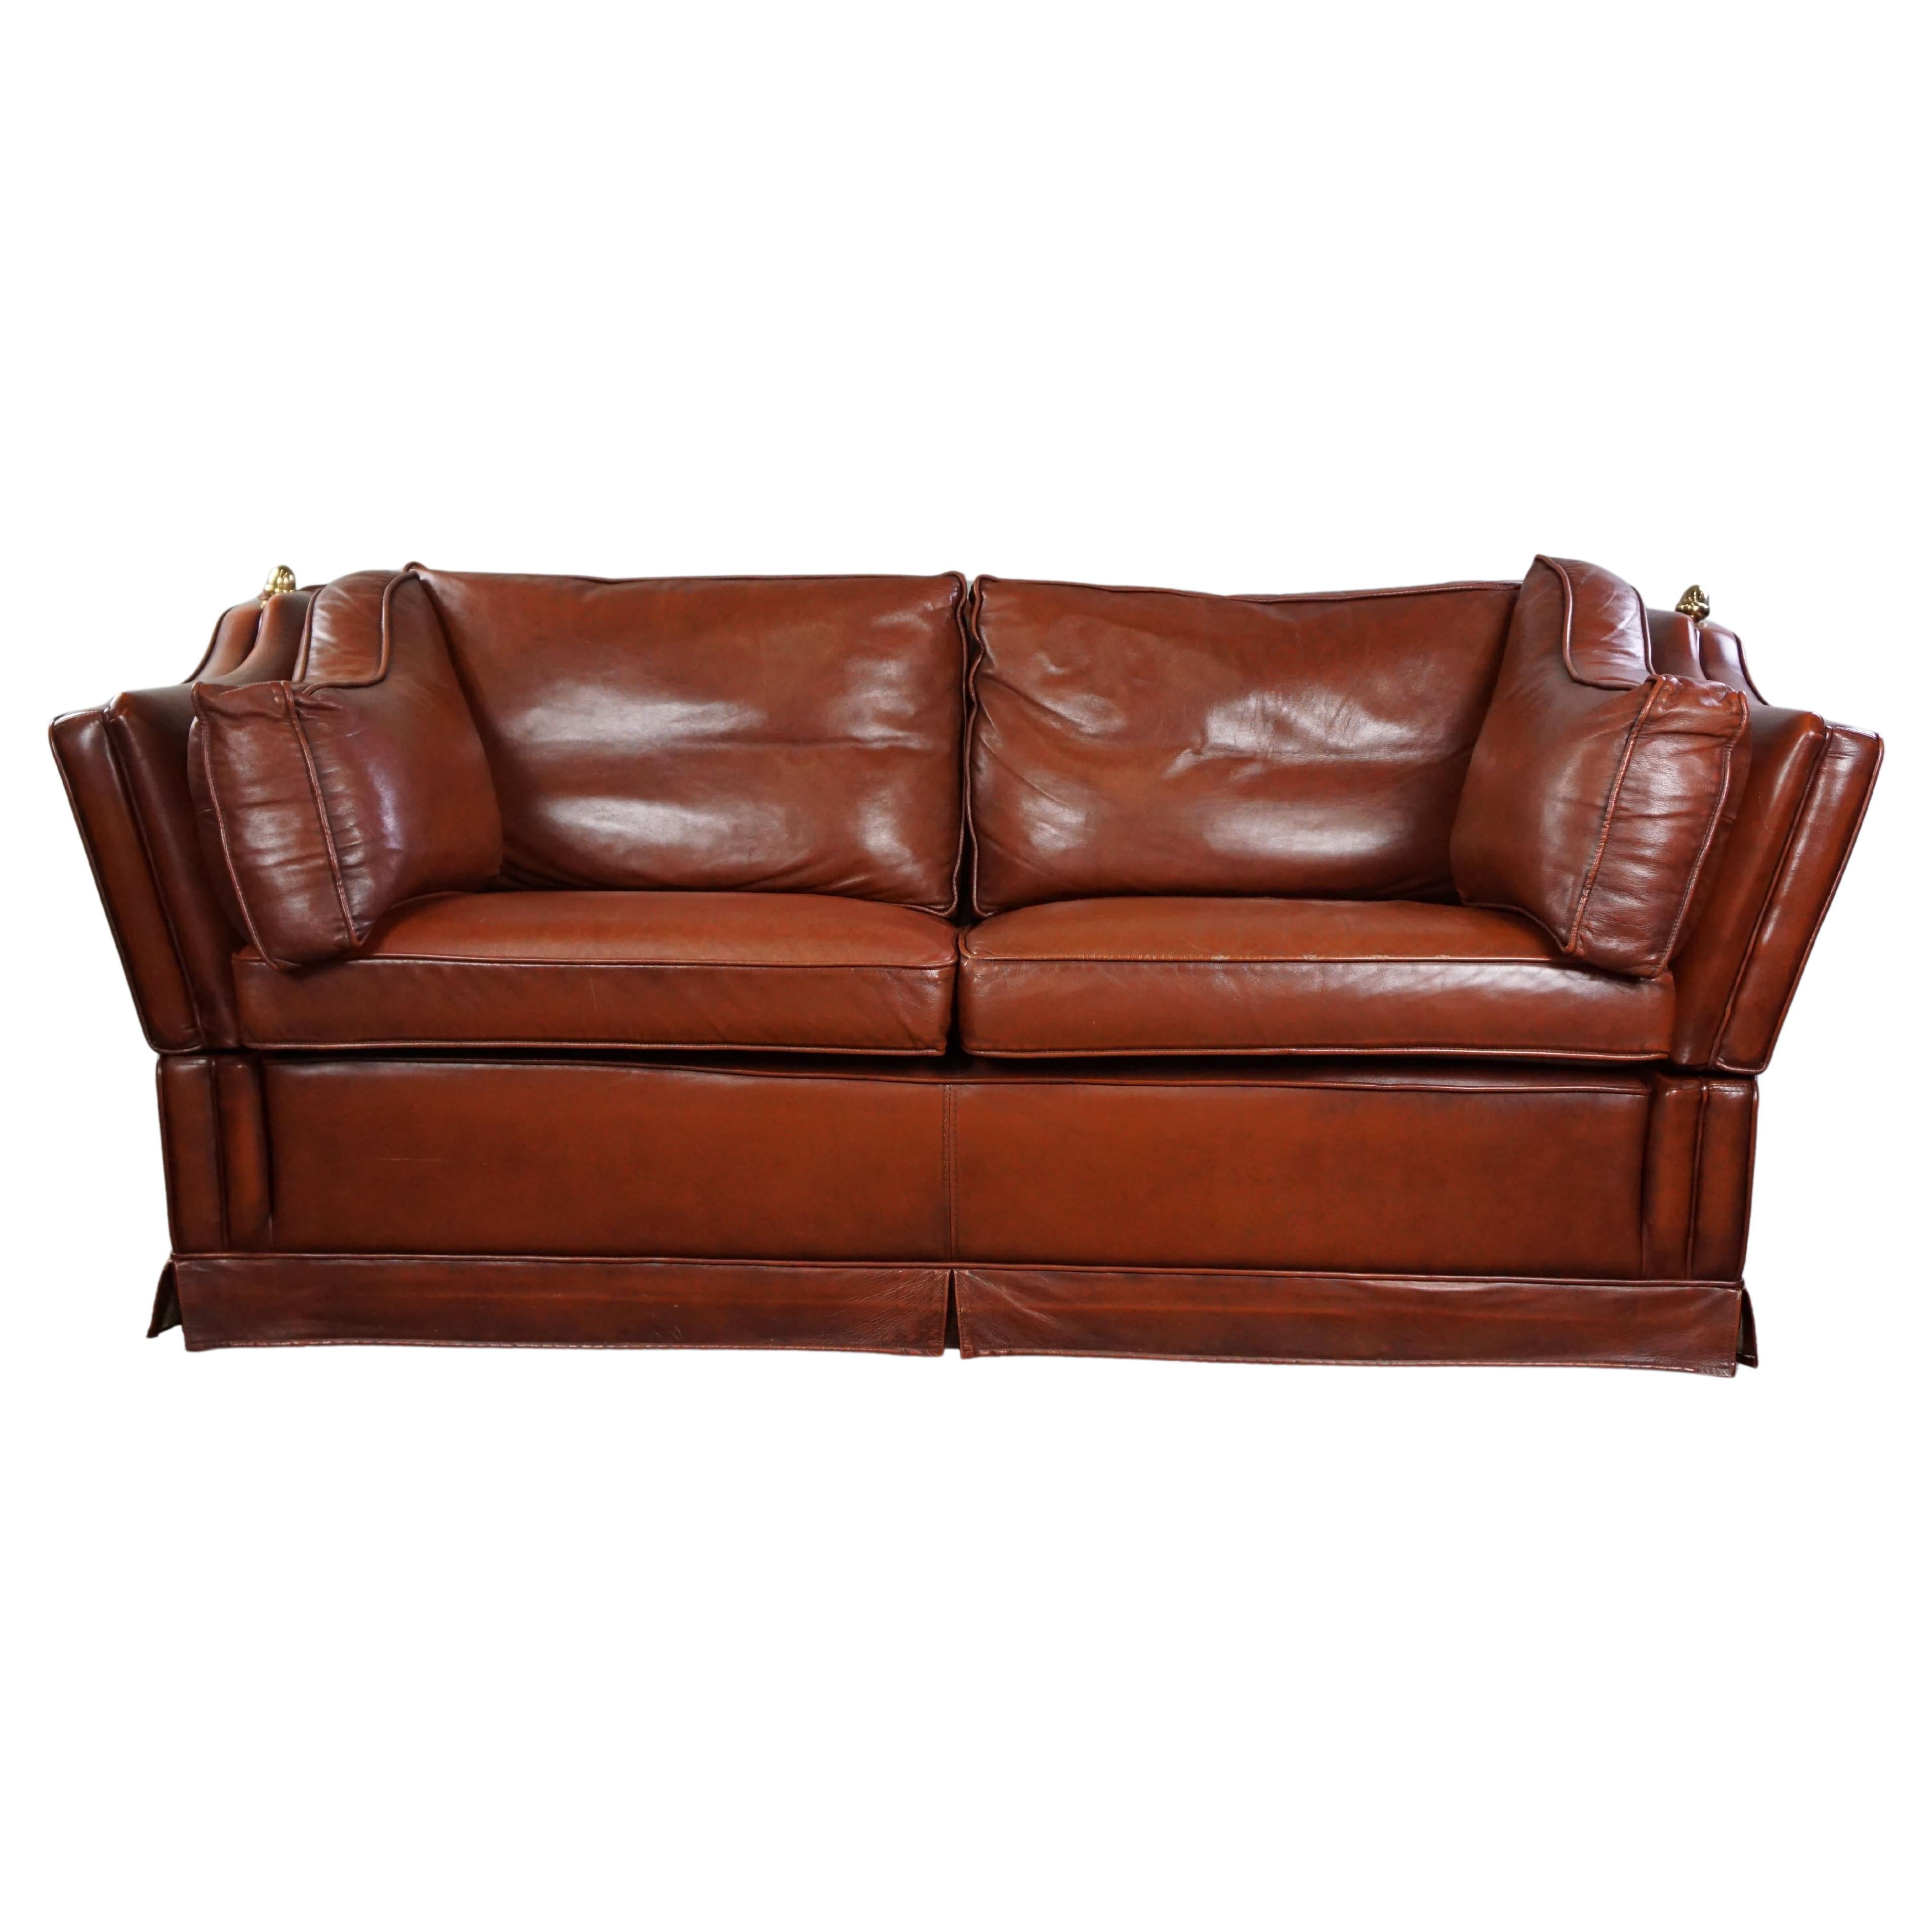 2-seater castle bench made of high-quality cognac-colored cowhide leather. For Sale